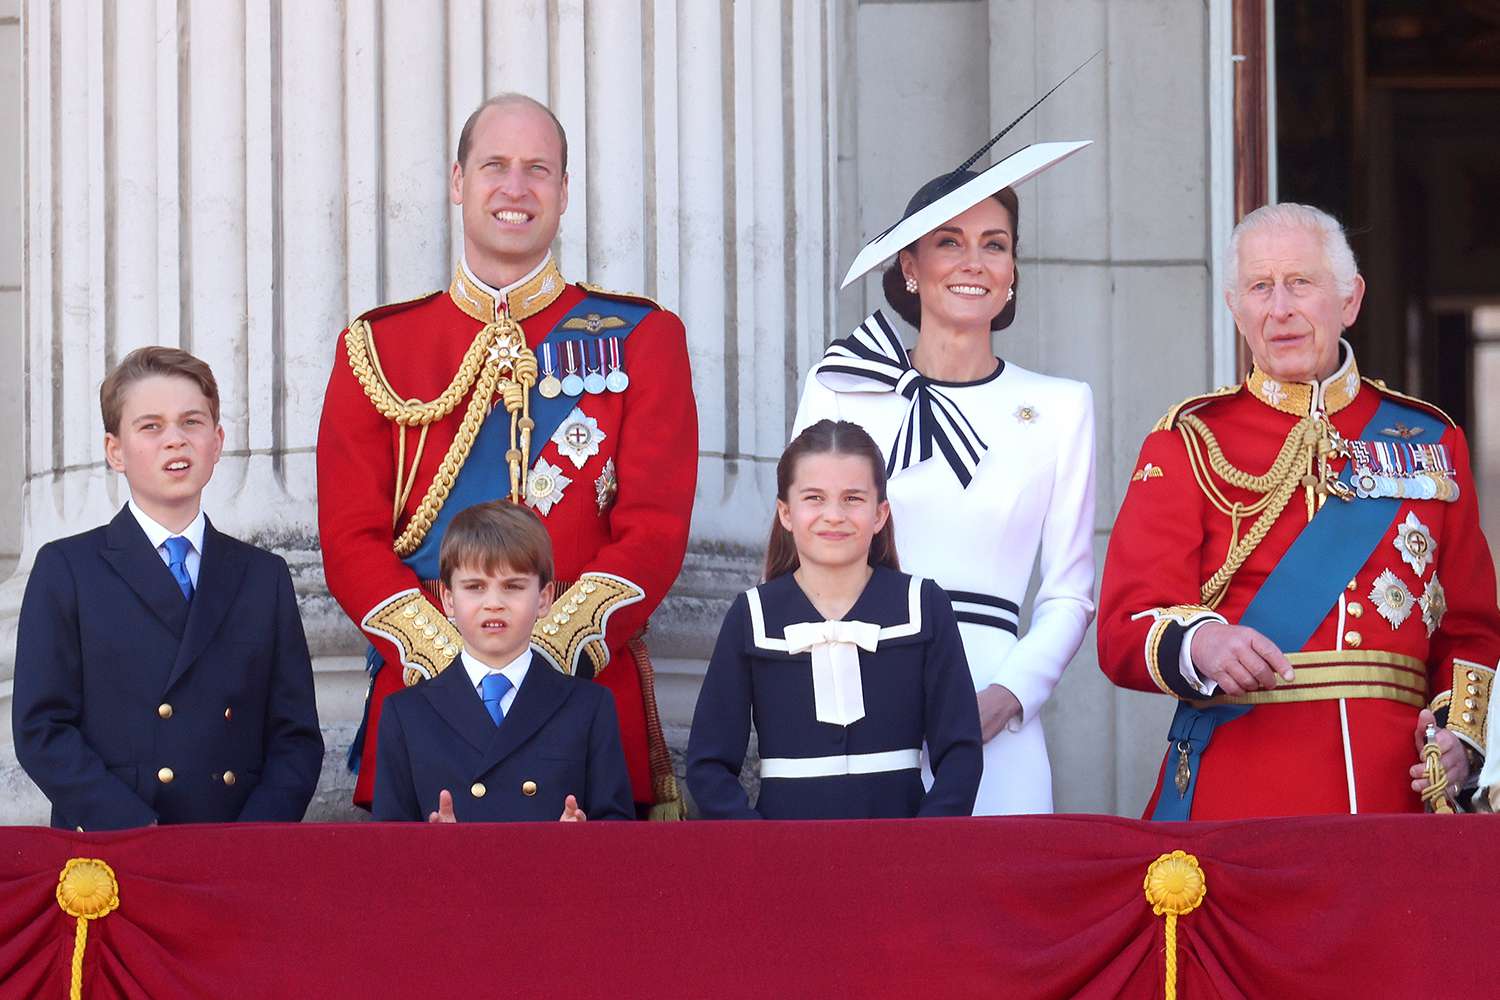 **King Charles III Steps Down from Leading Trooping the Colour Ceremony**